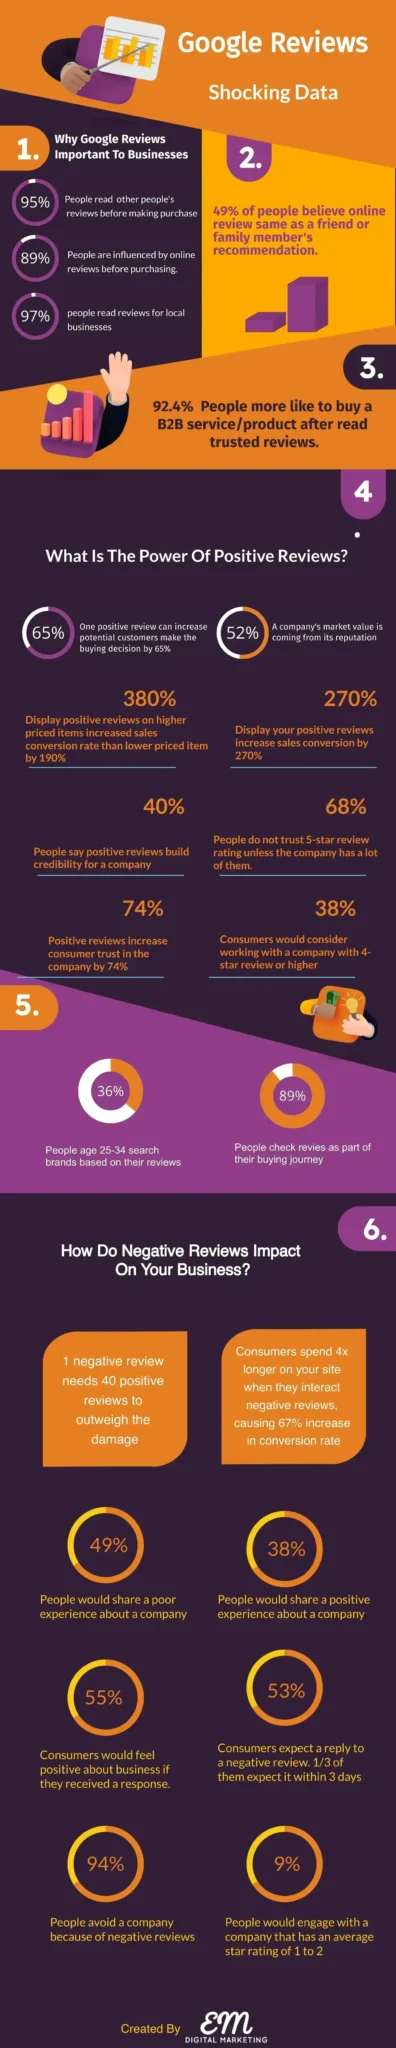 Google reviews infographic. statistic and data displied in orange, purple and black colour mixed.